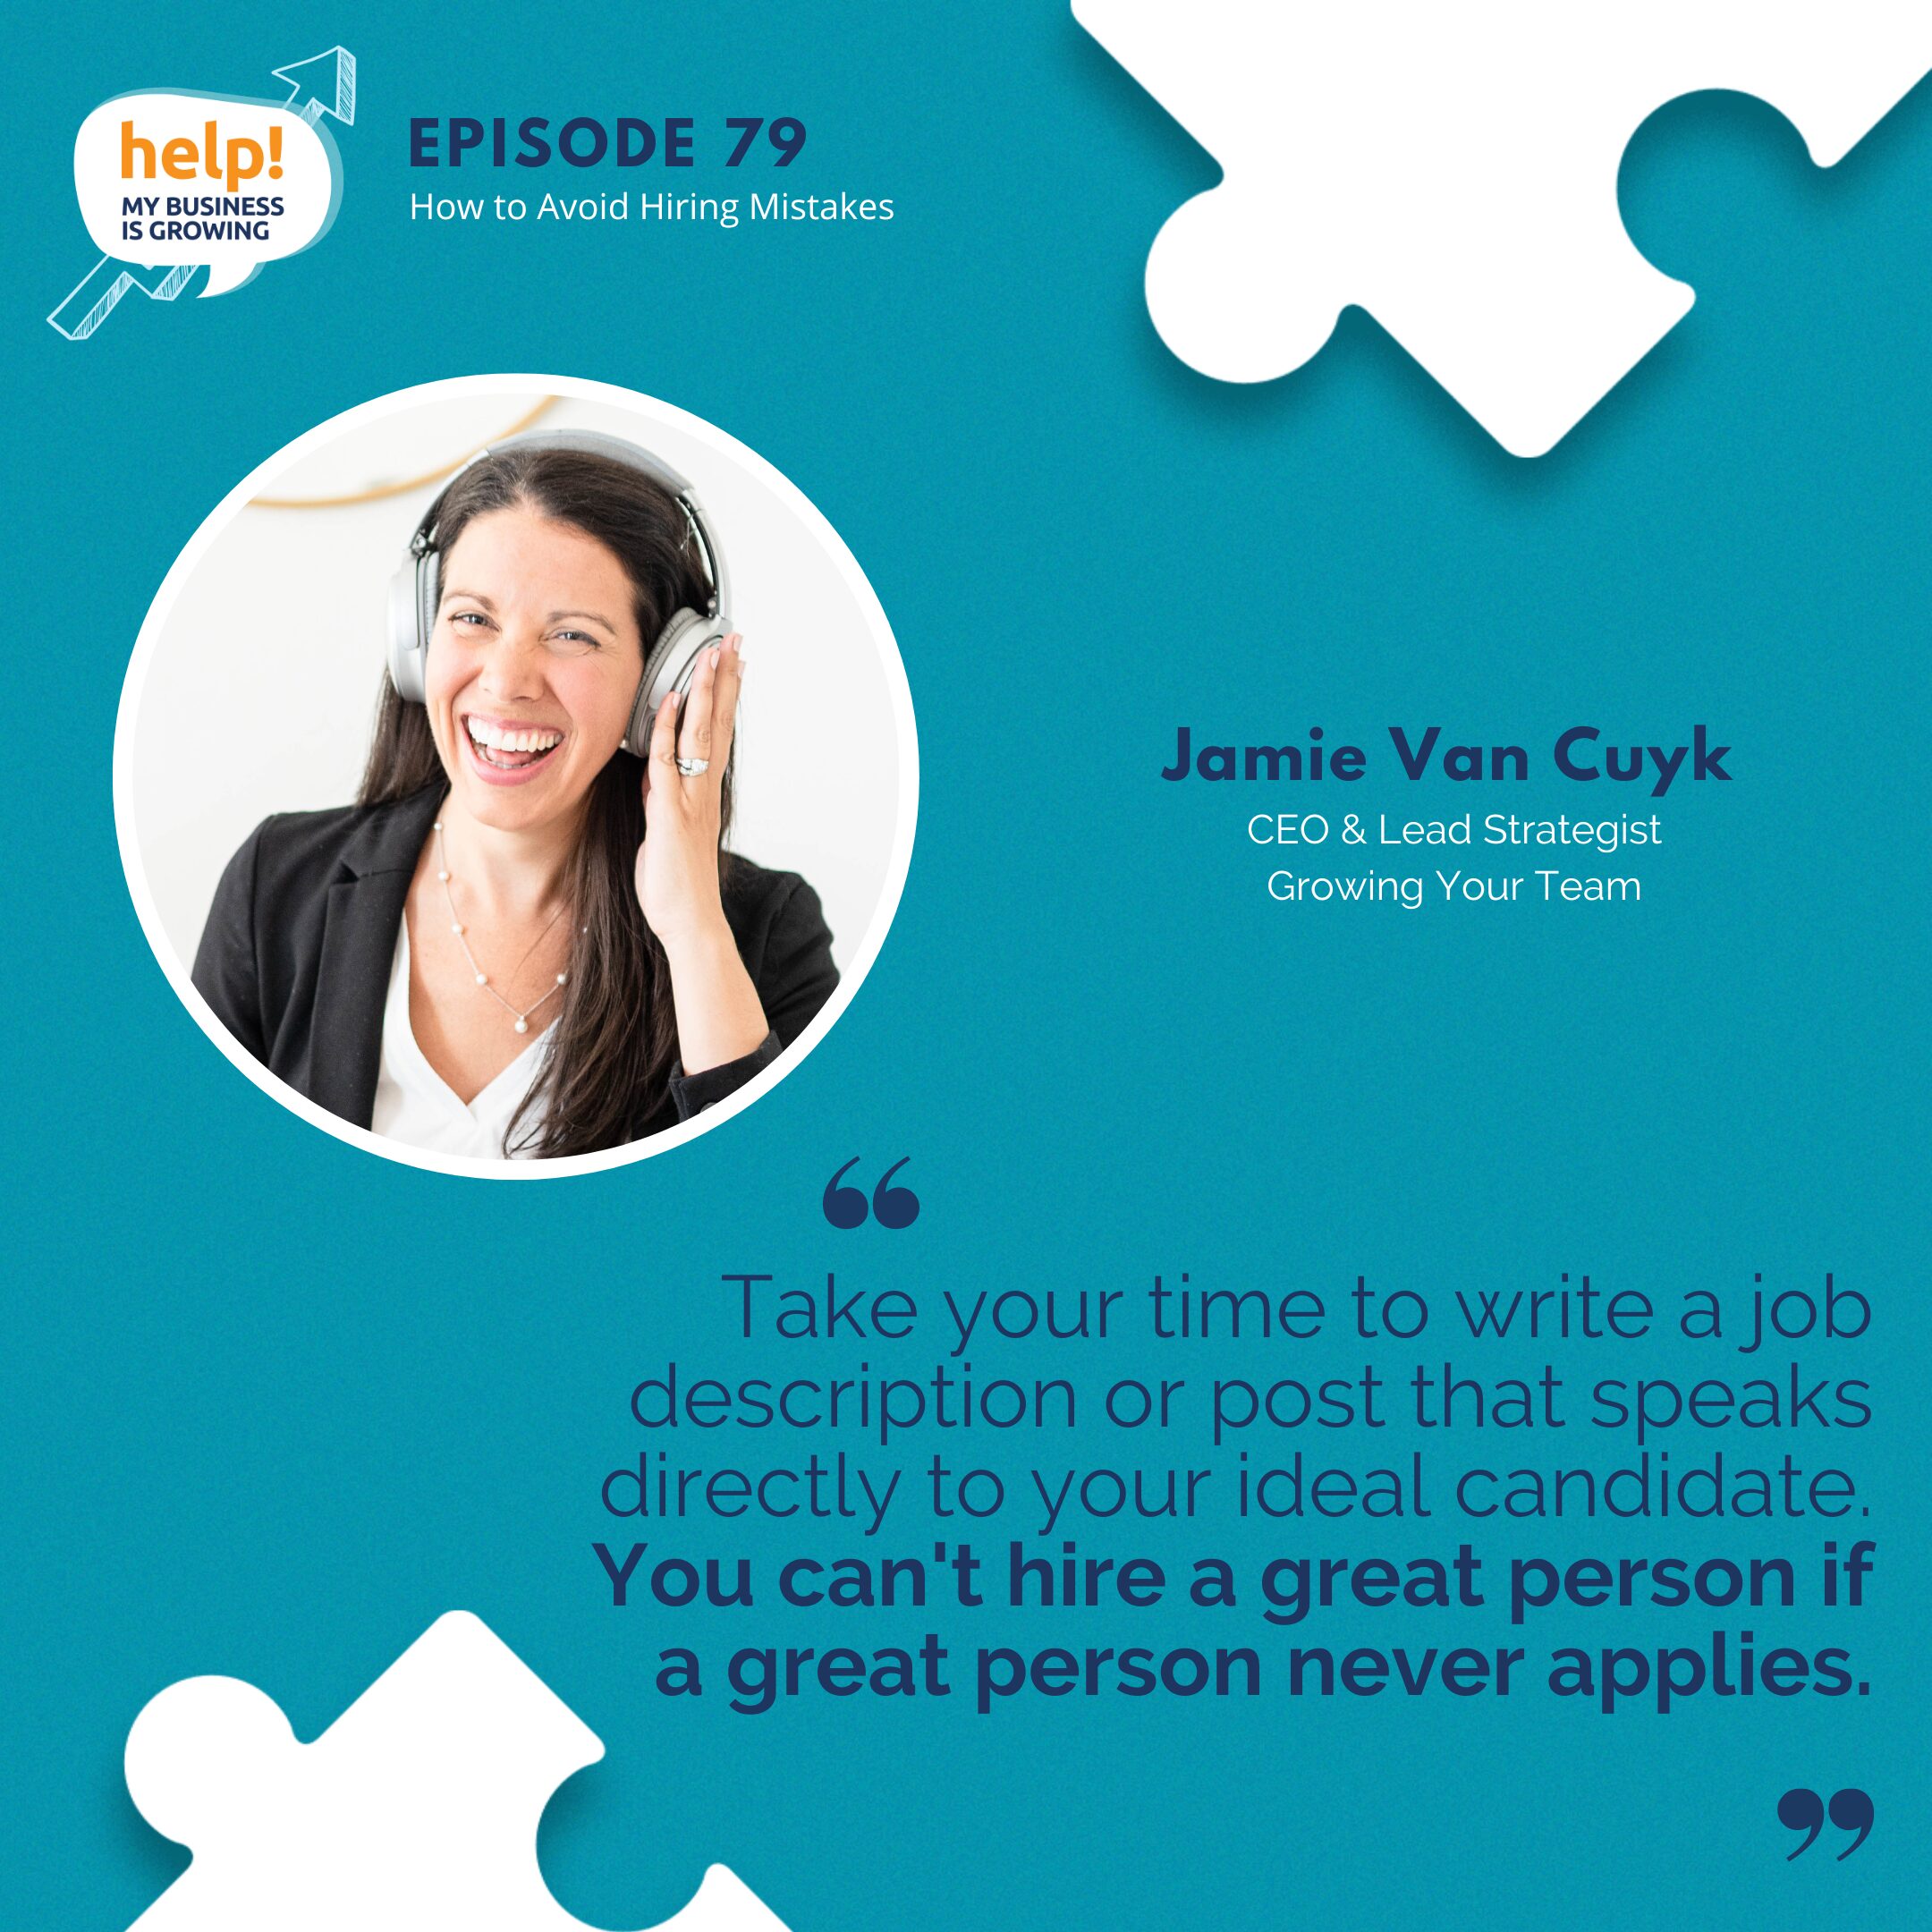 Take your time to write a job description or post that speaks directly to your ideal candidate. You can't hire a great person if a great person never applies.